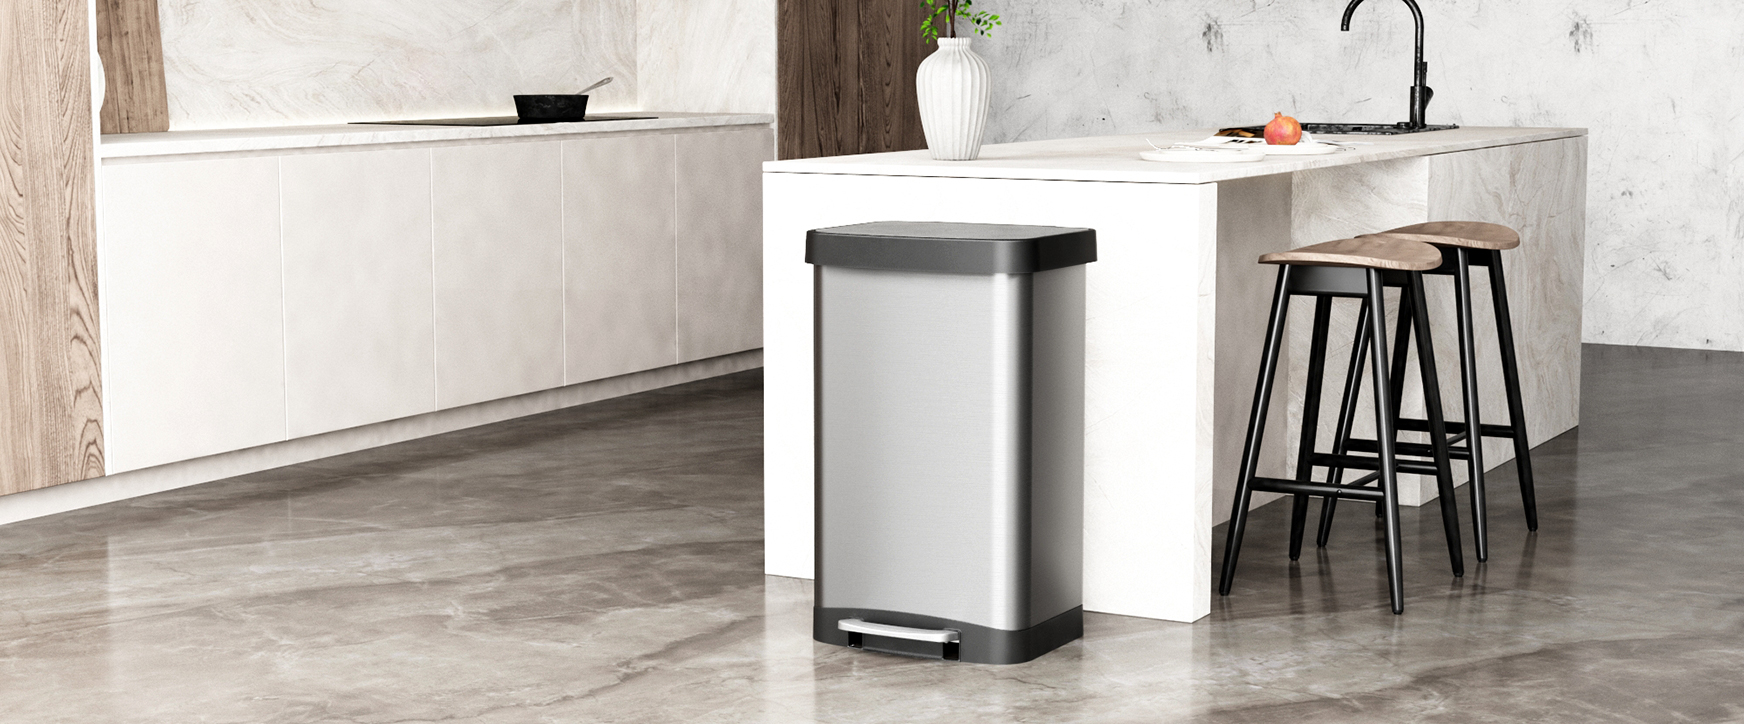 Innovaze 8 Gal.30 Liter and 1.3 Gal.5 Liter Rectangular Stainless Steel Step-On Trash Can Set for Kitchen and Bathroom